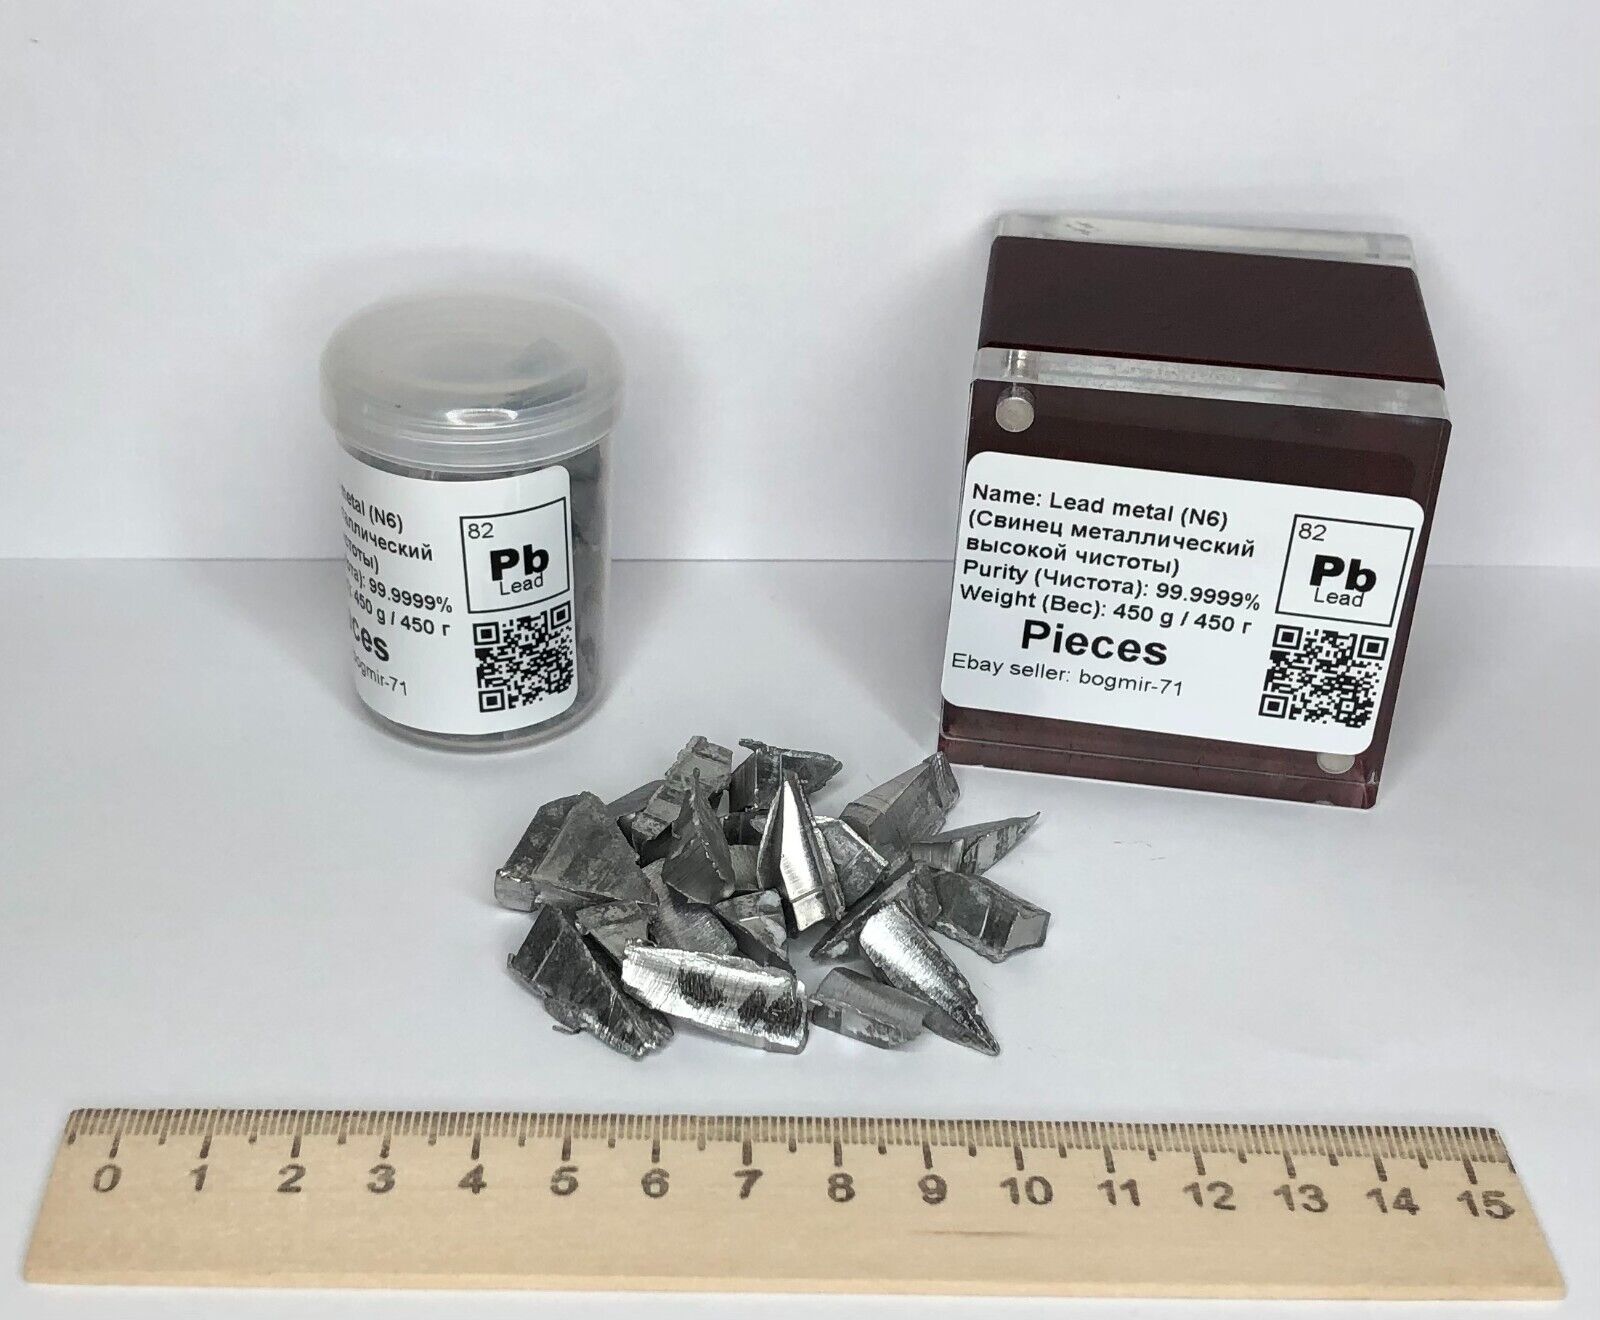 Lead Metal 99.9999% Pieces 450g Extremely High Purity Periodic Element Sample